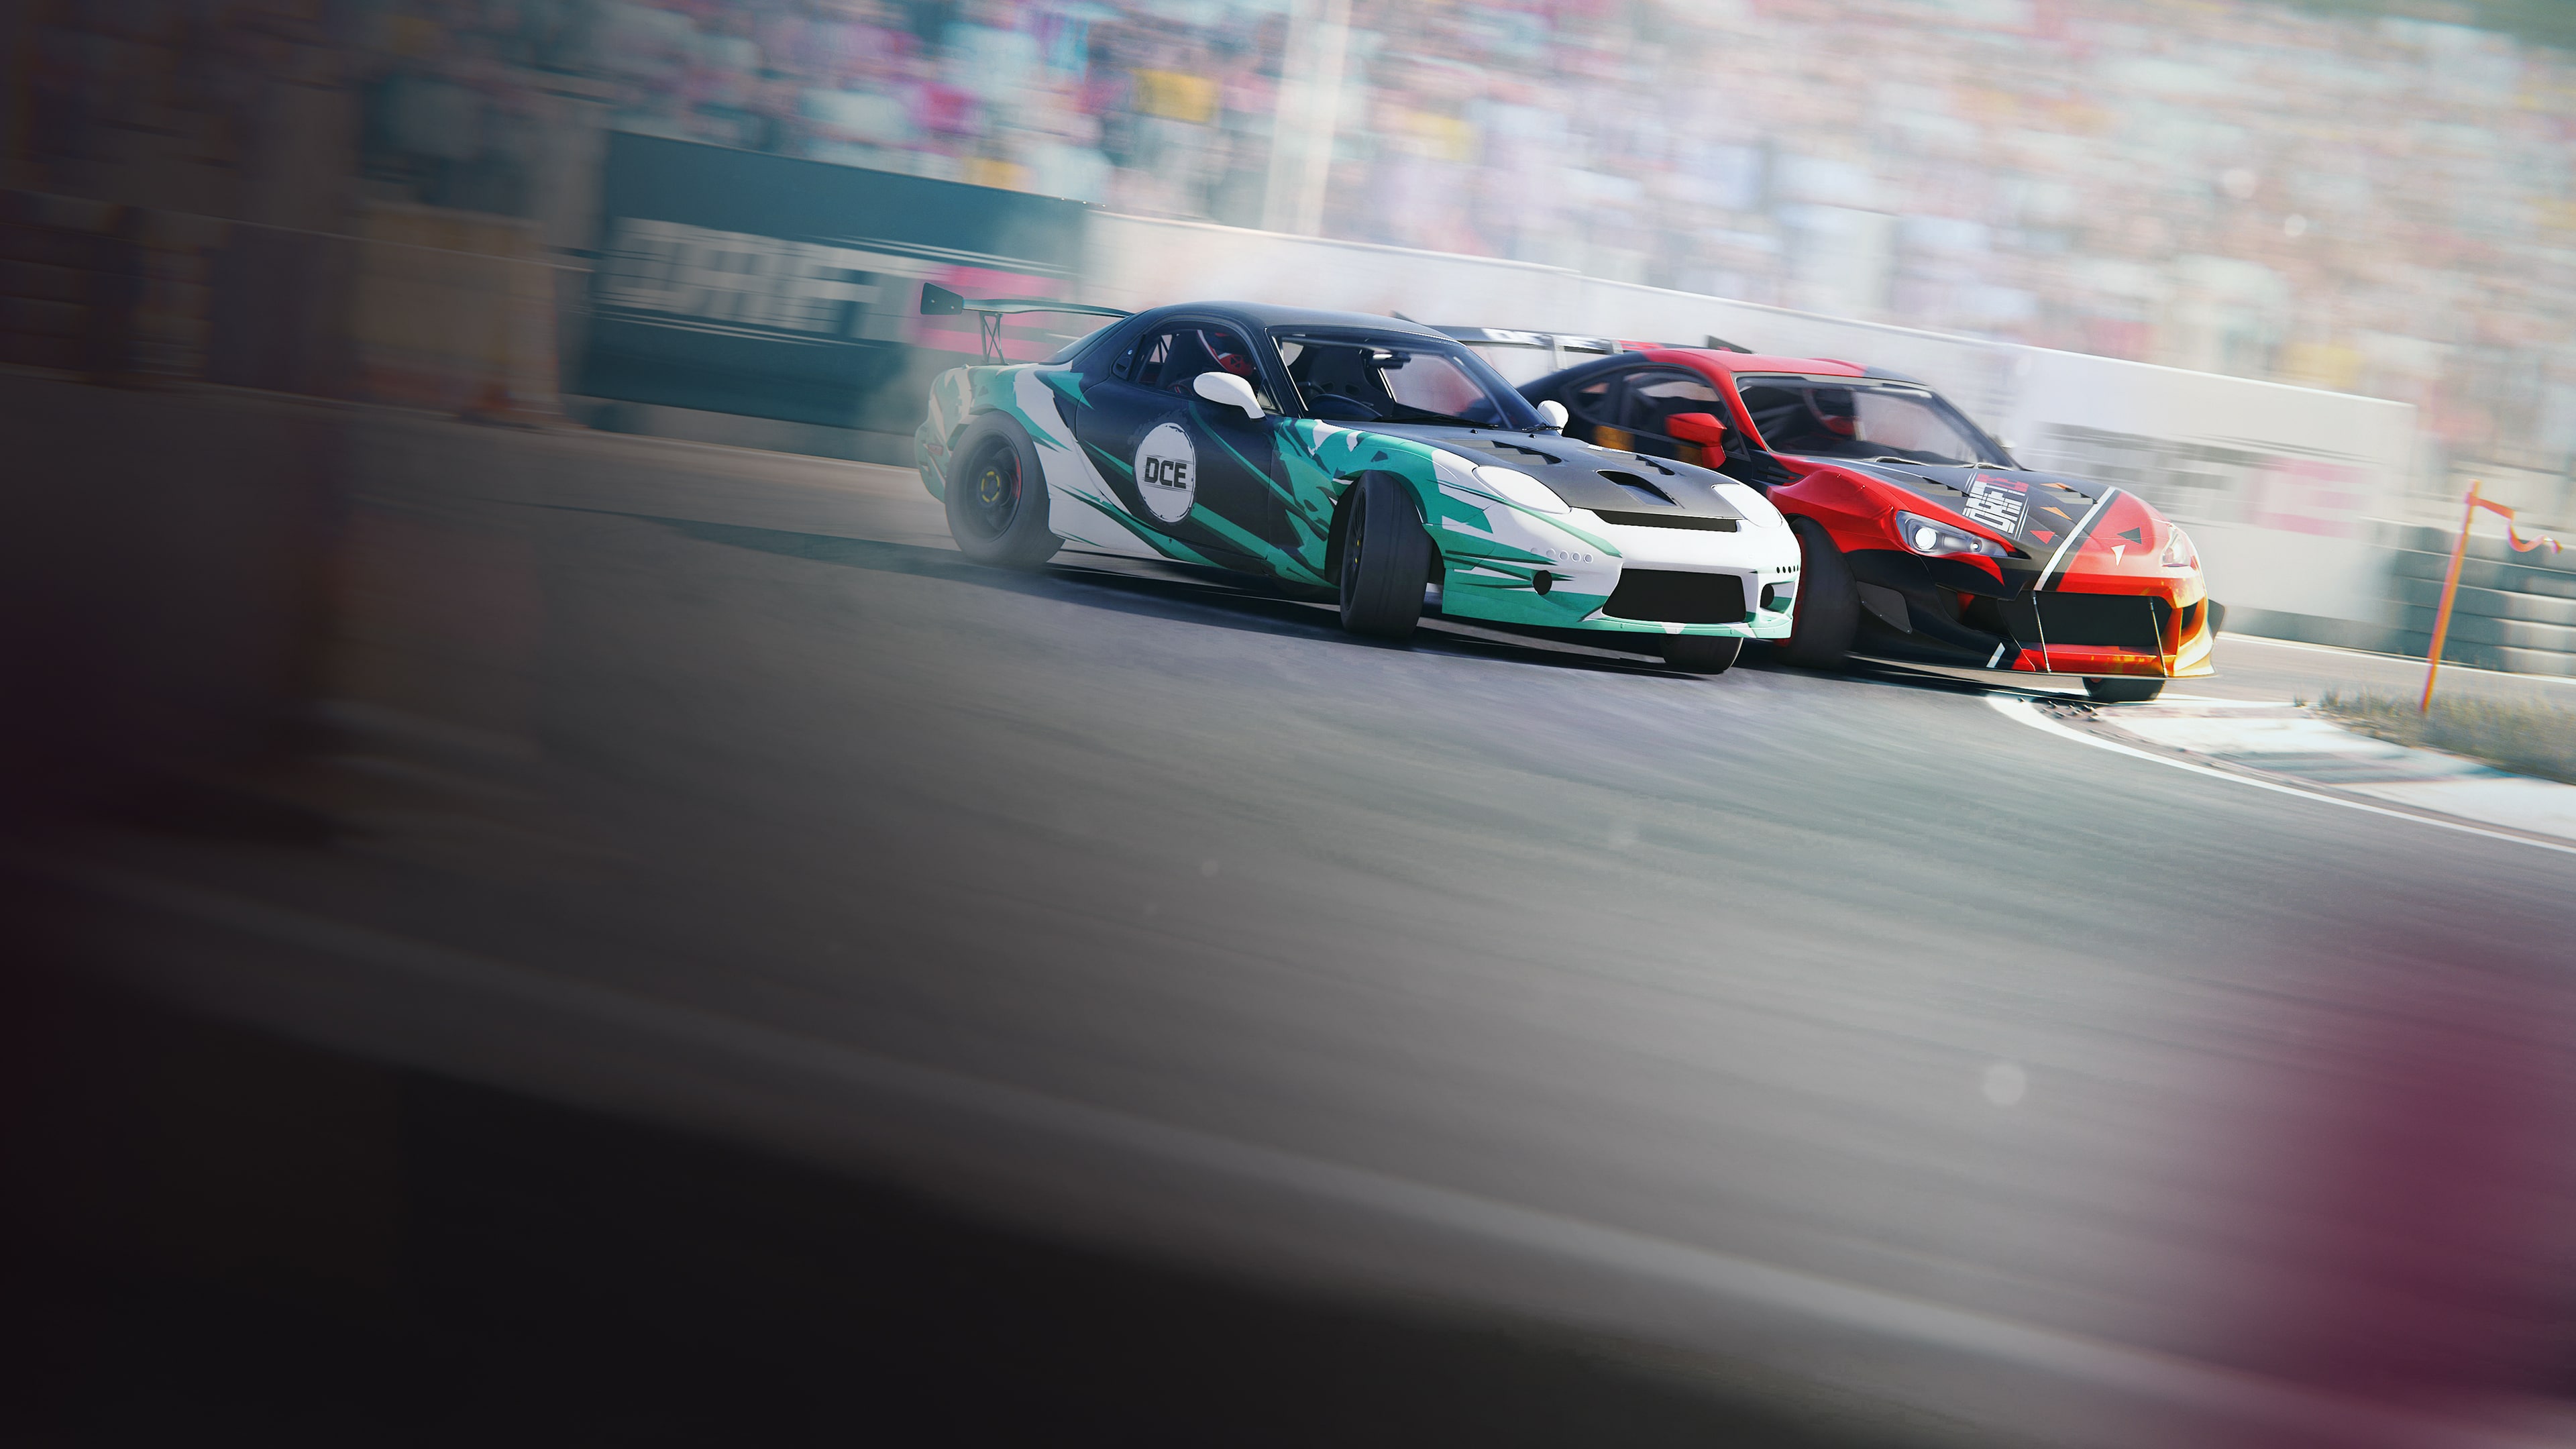 Drift racing game DRIFTCE announced for PS5, Xbox Series, PS4, and